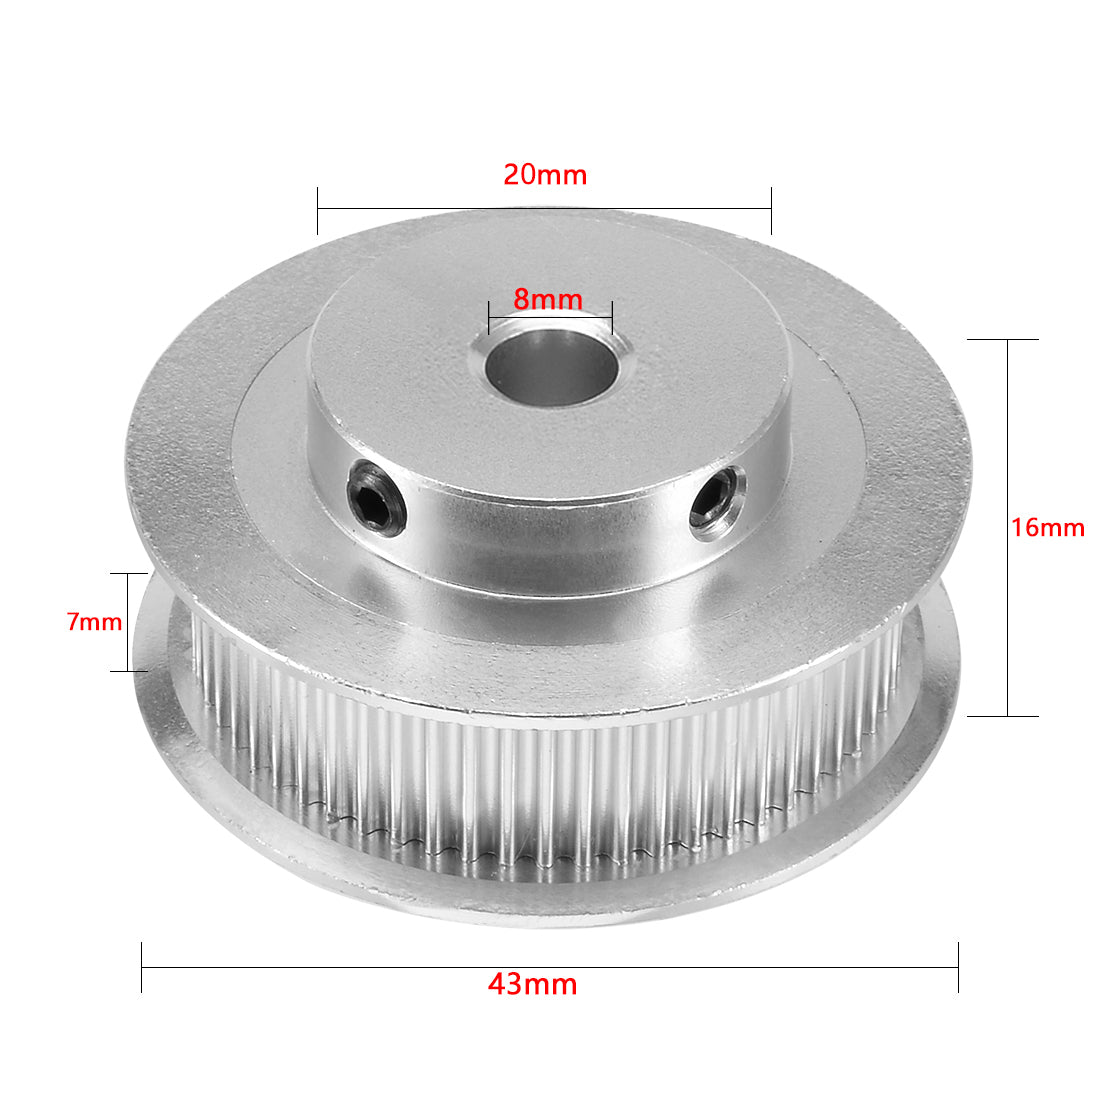 uxcell Uxcell 2mm Pitch 60 Teeth 8mm Bore Timing Belt Pulley Wheel for 6mm Belt